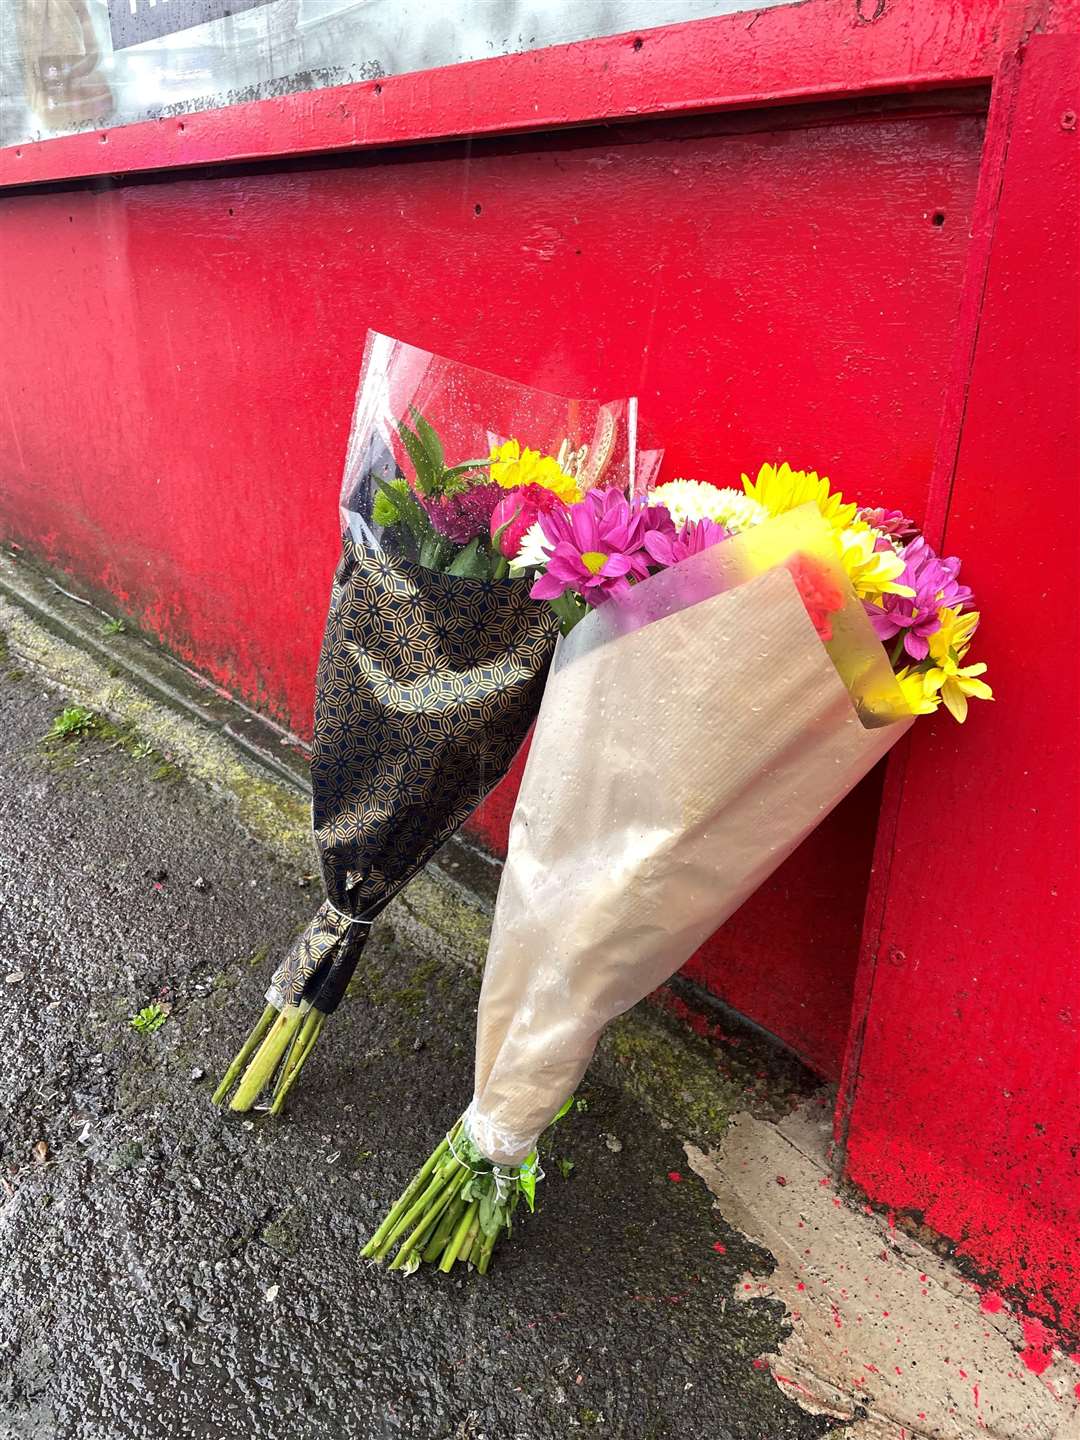 Floral tributes left in Bradford city centre after Kulsuma Akter was stabbed to death in the street as she pushed her baby in a pram (Dave Higgens/PA)